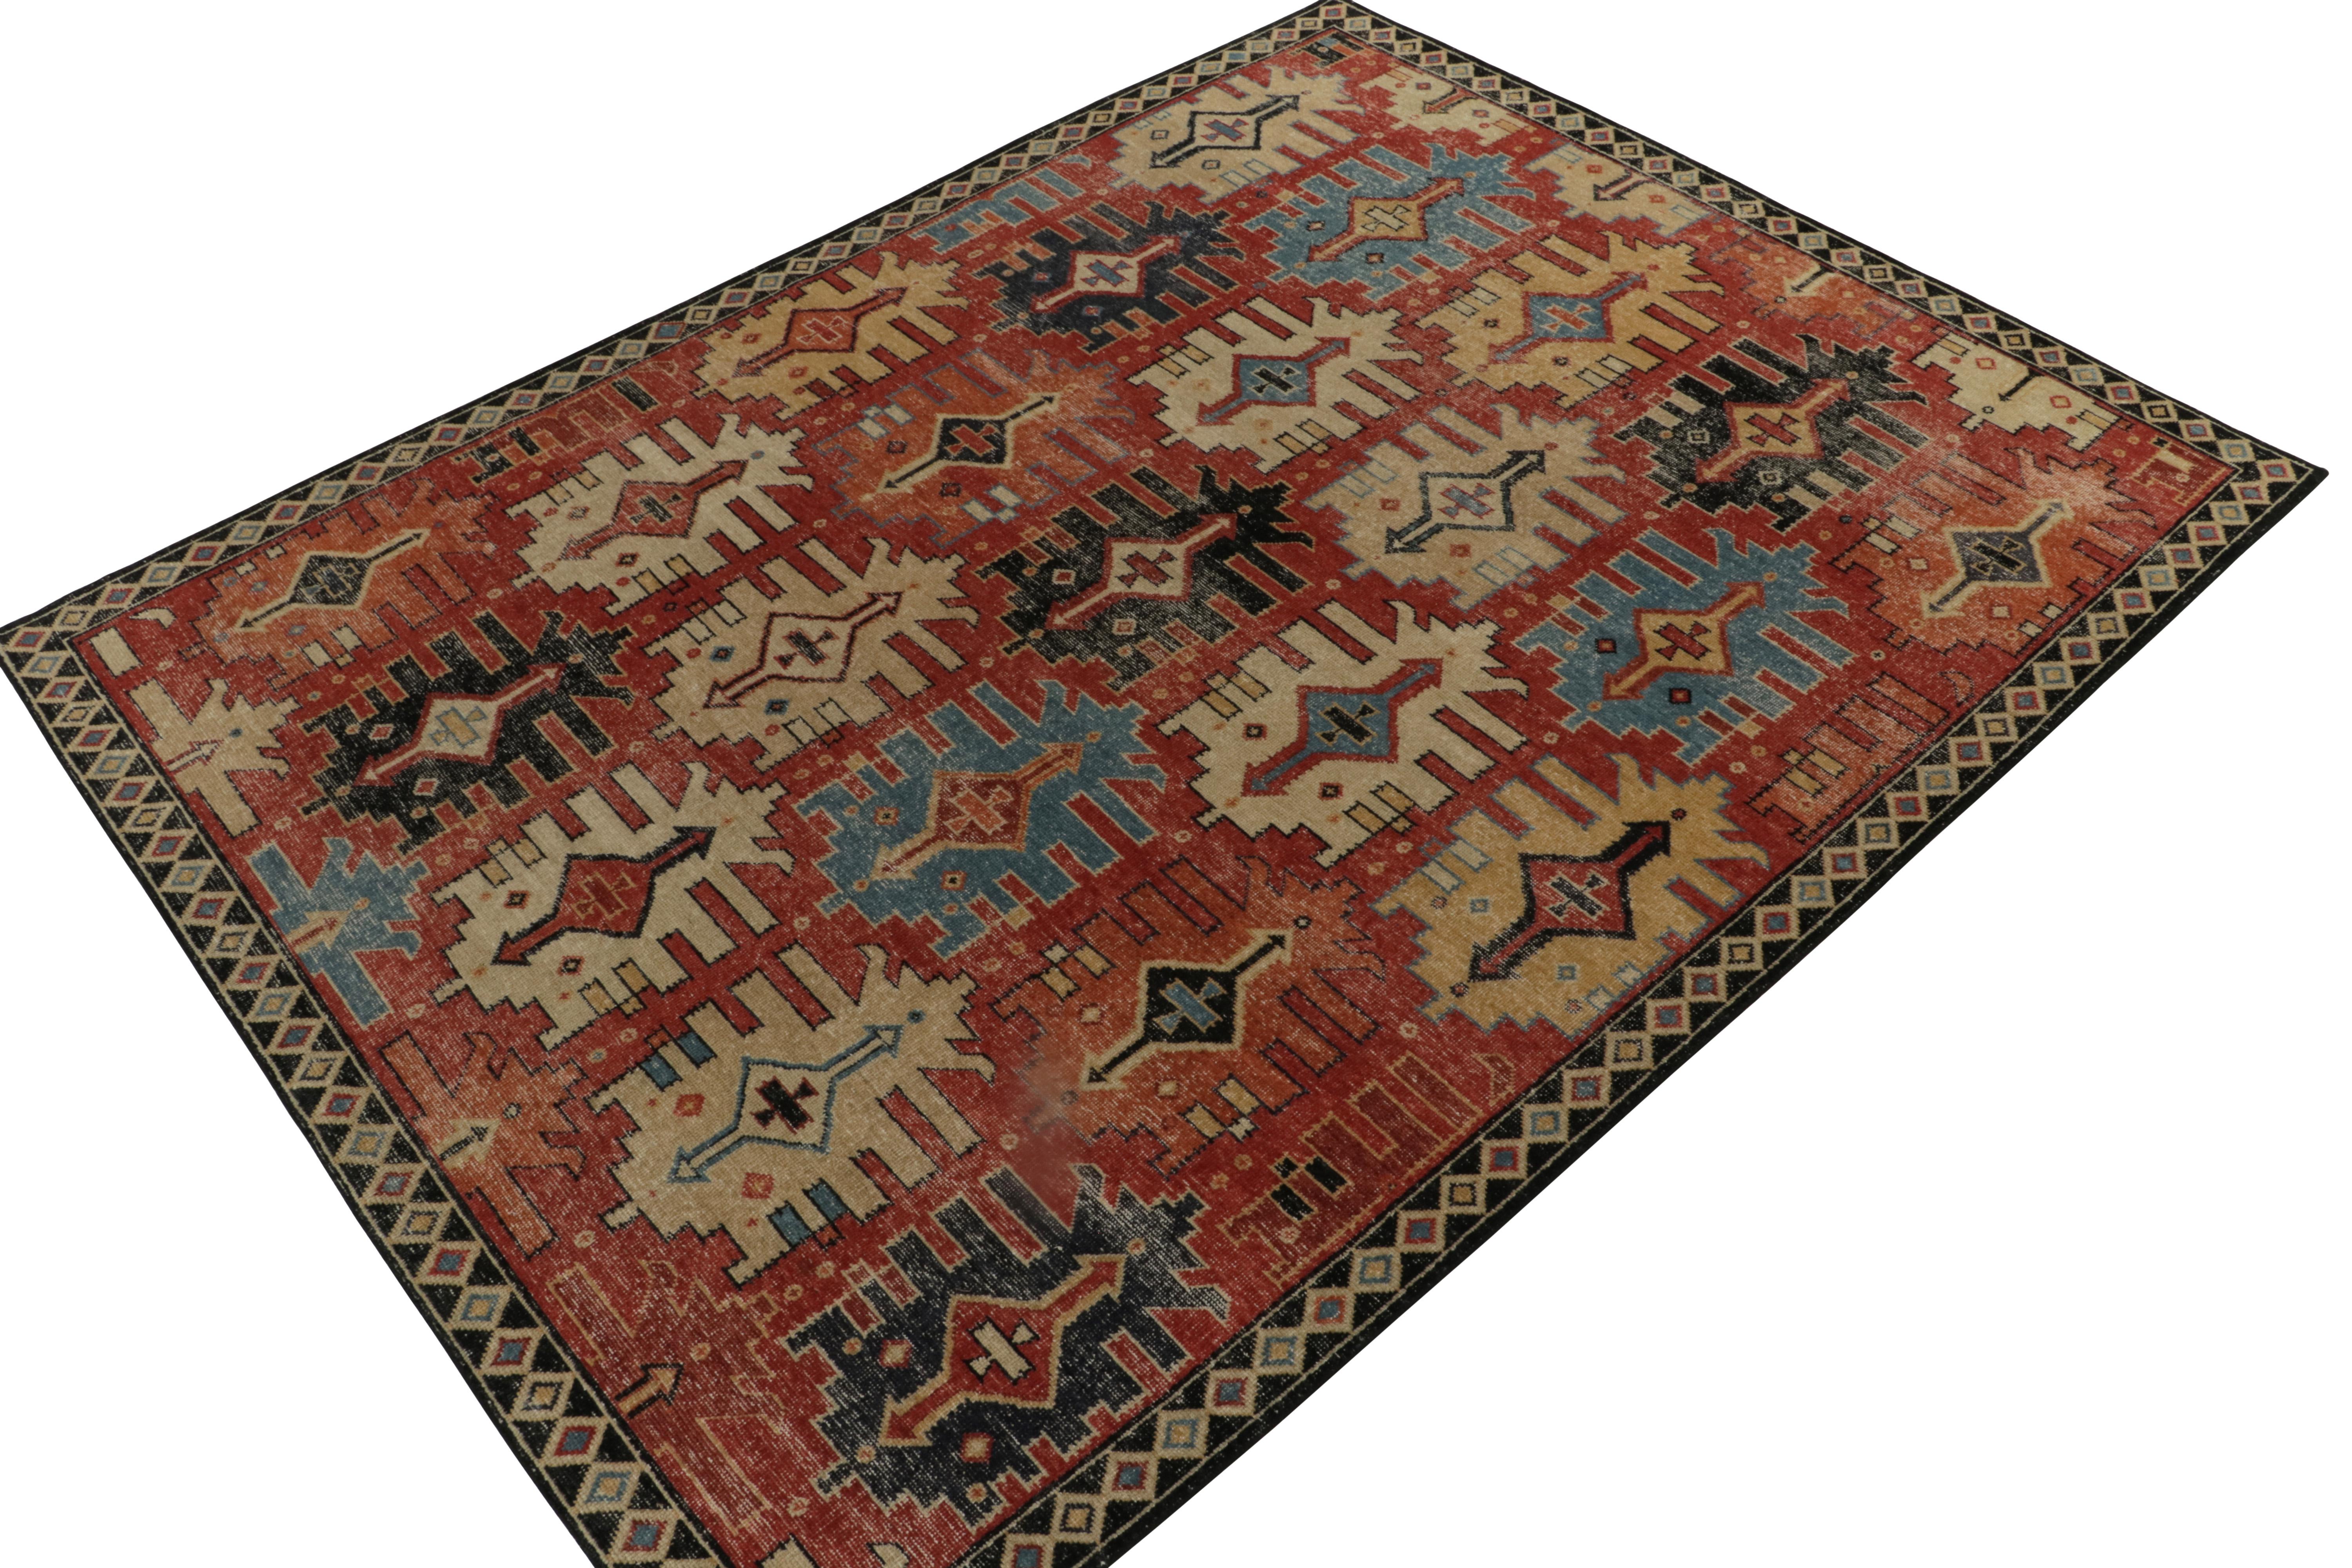 From Rug & Kilim’s Homage Collection, this 9x12 hand-knotted wool rug recaptures the brilliant look of 19th-century caucasian Shirvan provenance. 

The beautiful rustic play of rust red and beige with blue, black and other bold hues enjoys a natural